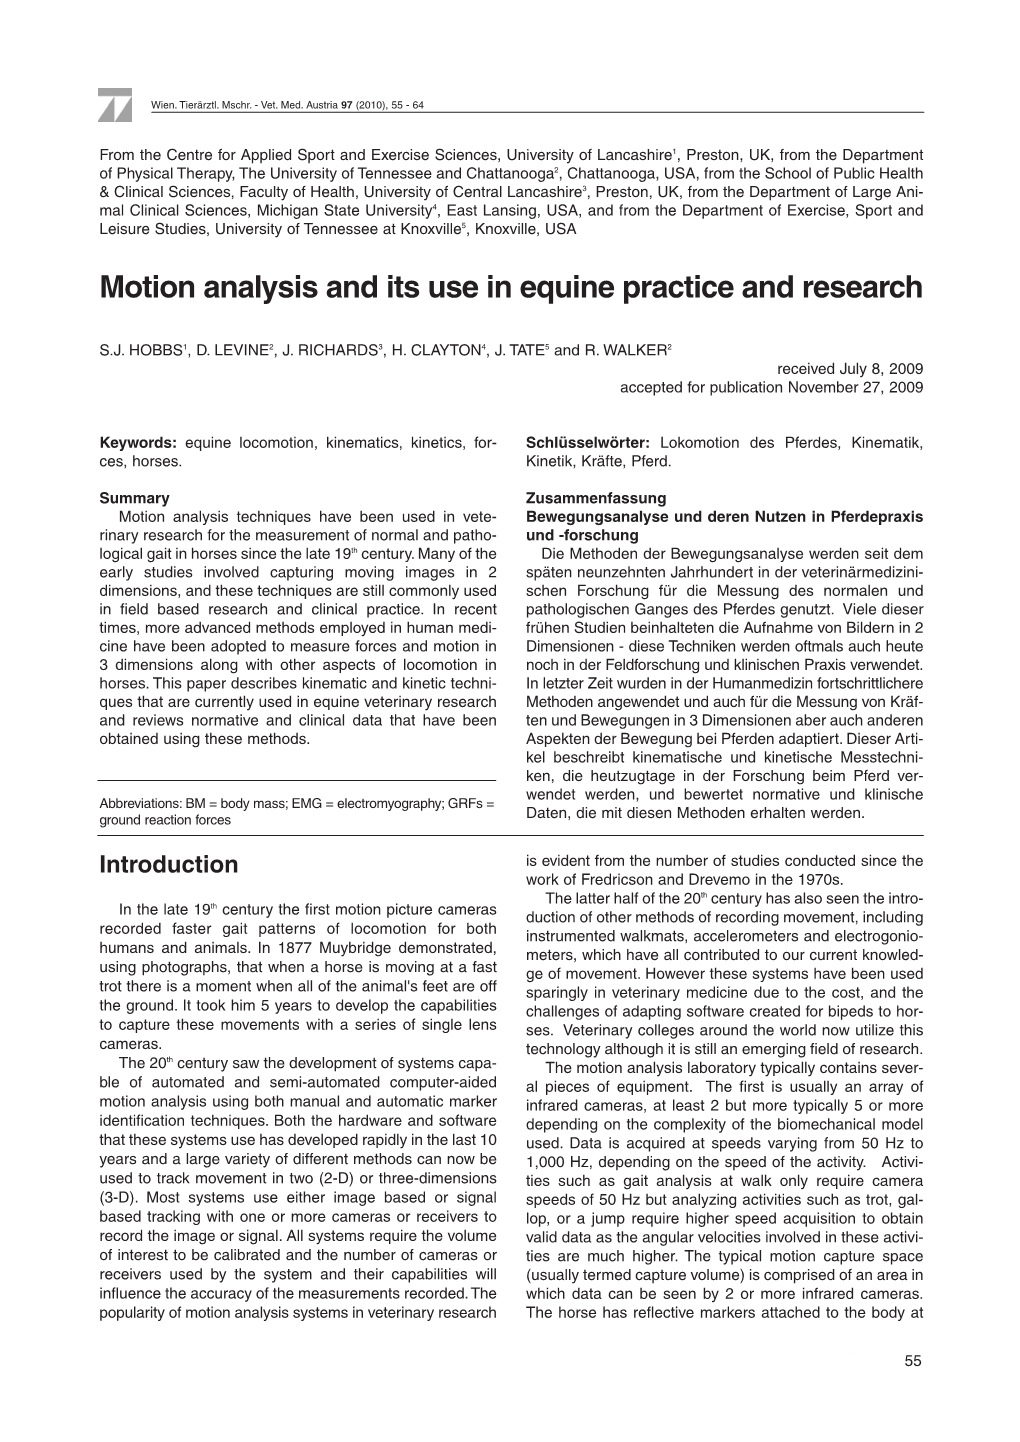 Motion Analysis and Its Use in Equine Practice and Research